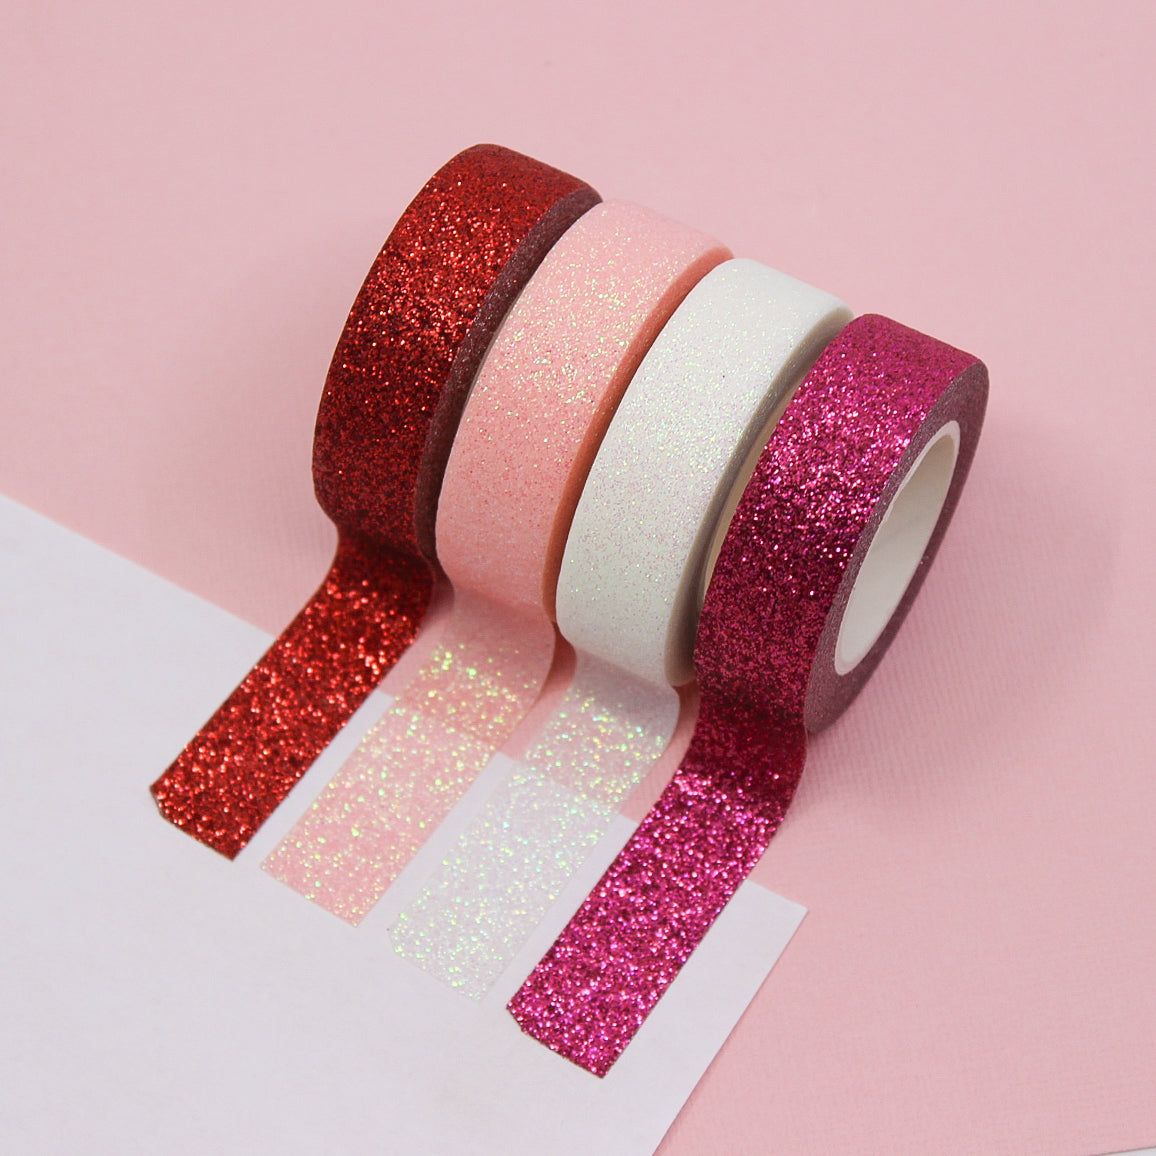 Capture the spirit of love with our Valentine's glitter washi tape, featuring sparkling hearts and romantic motifs in shades of red and pink, perfect for adding a touch of heartfelt sparkle to your crafts. This tape is sold at BBB Supplies Craft Shop.